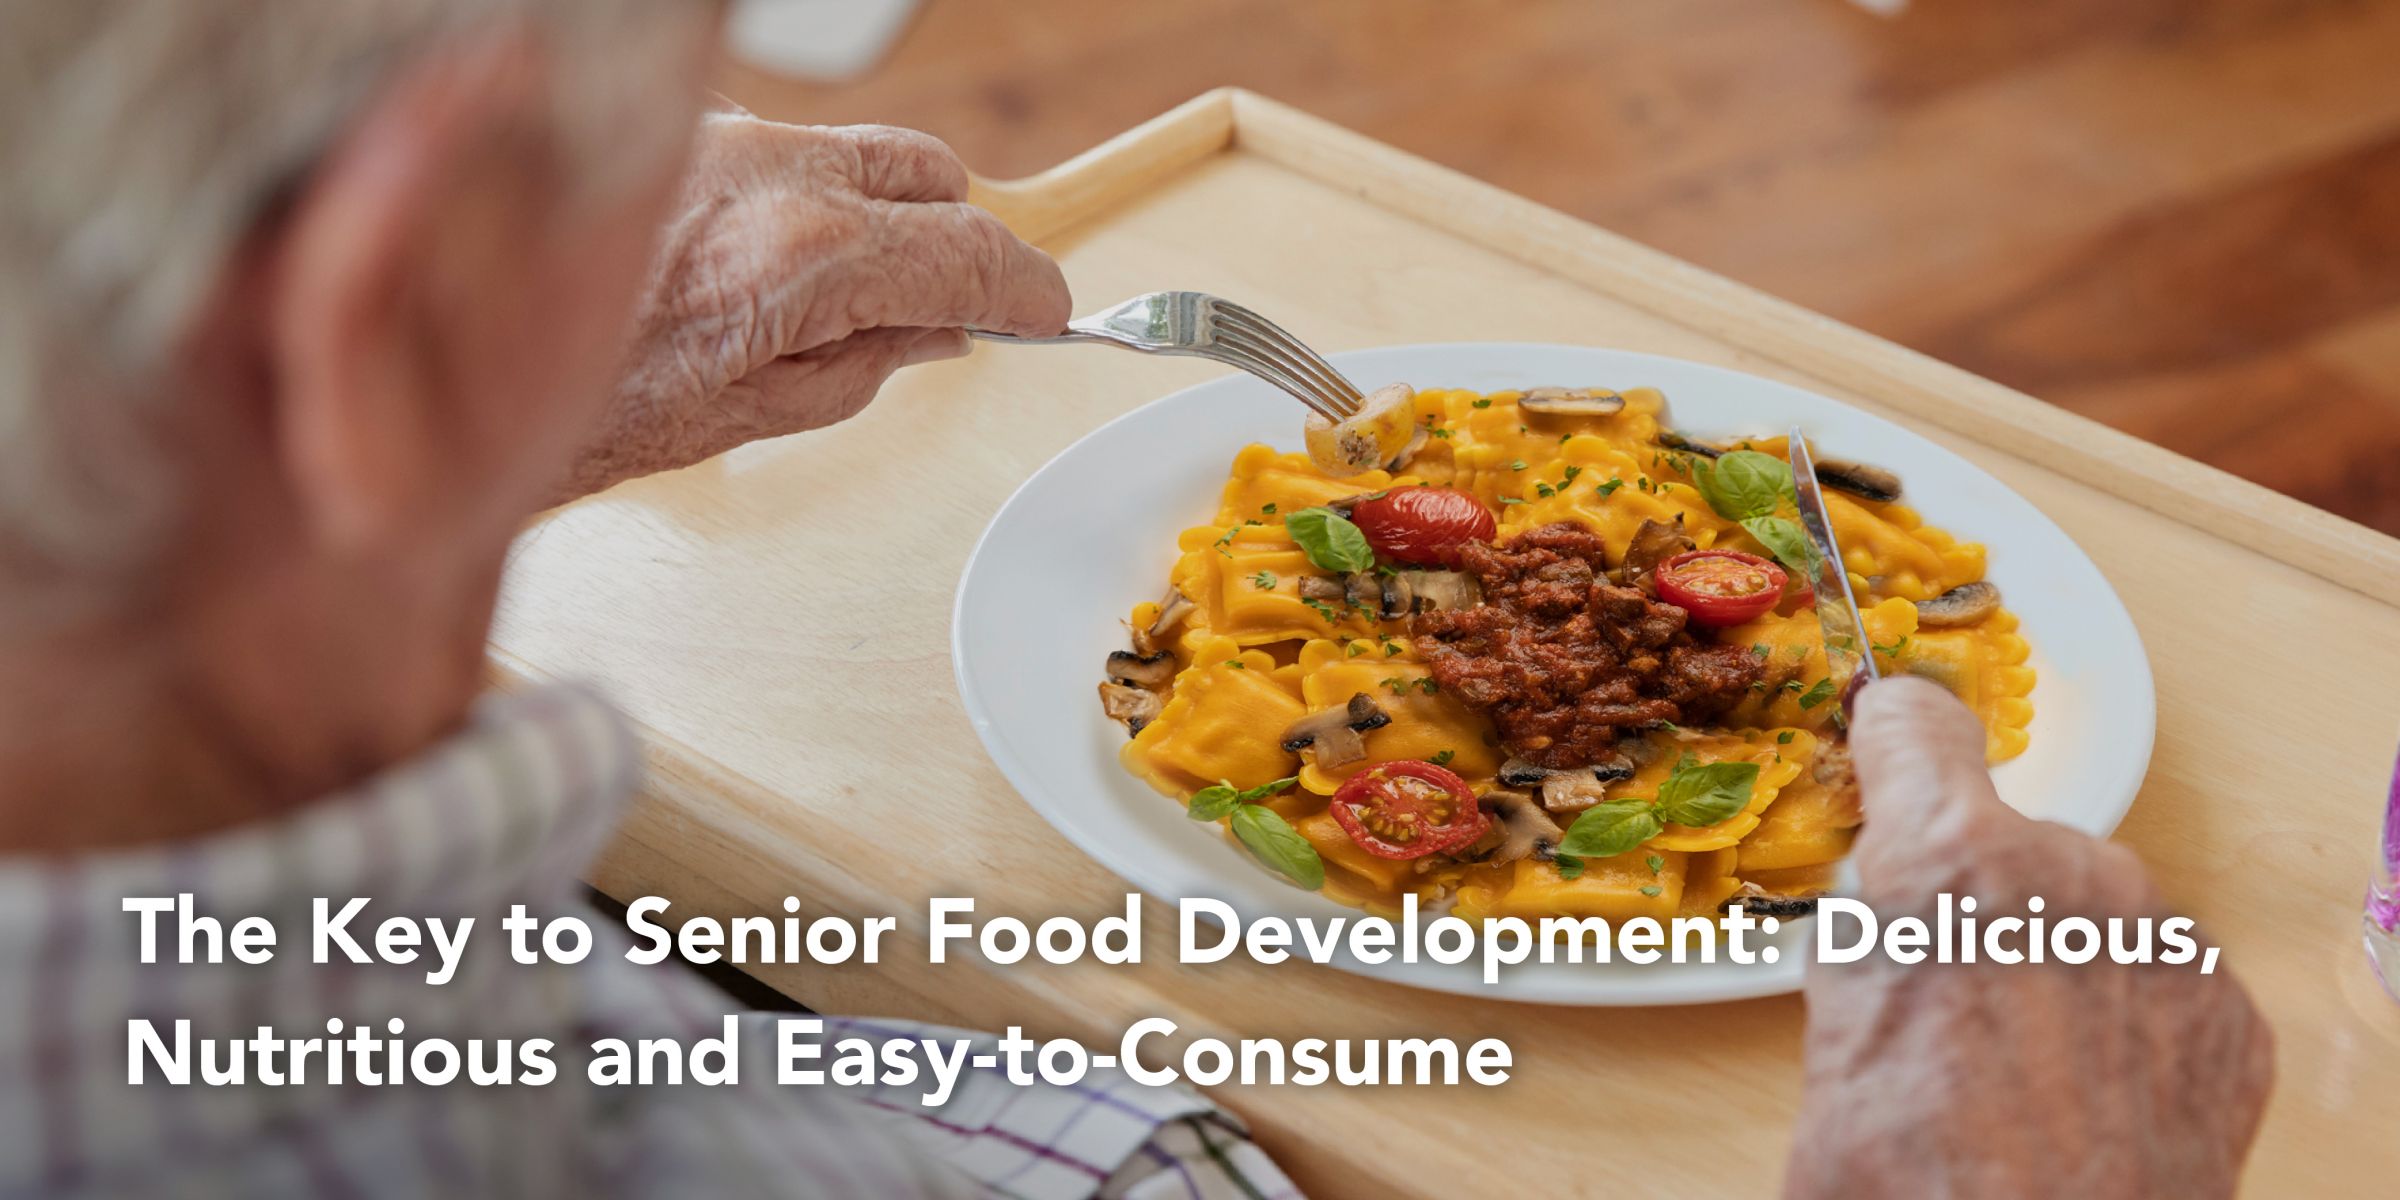 Future Food Market Trends for the Elderly Consumers